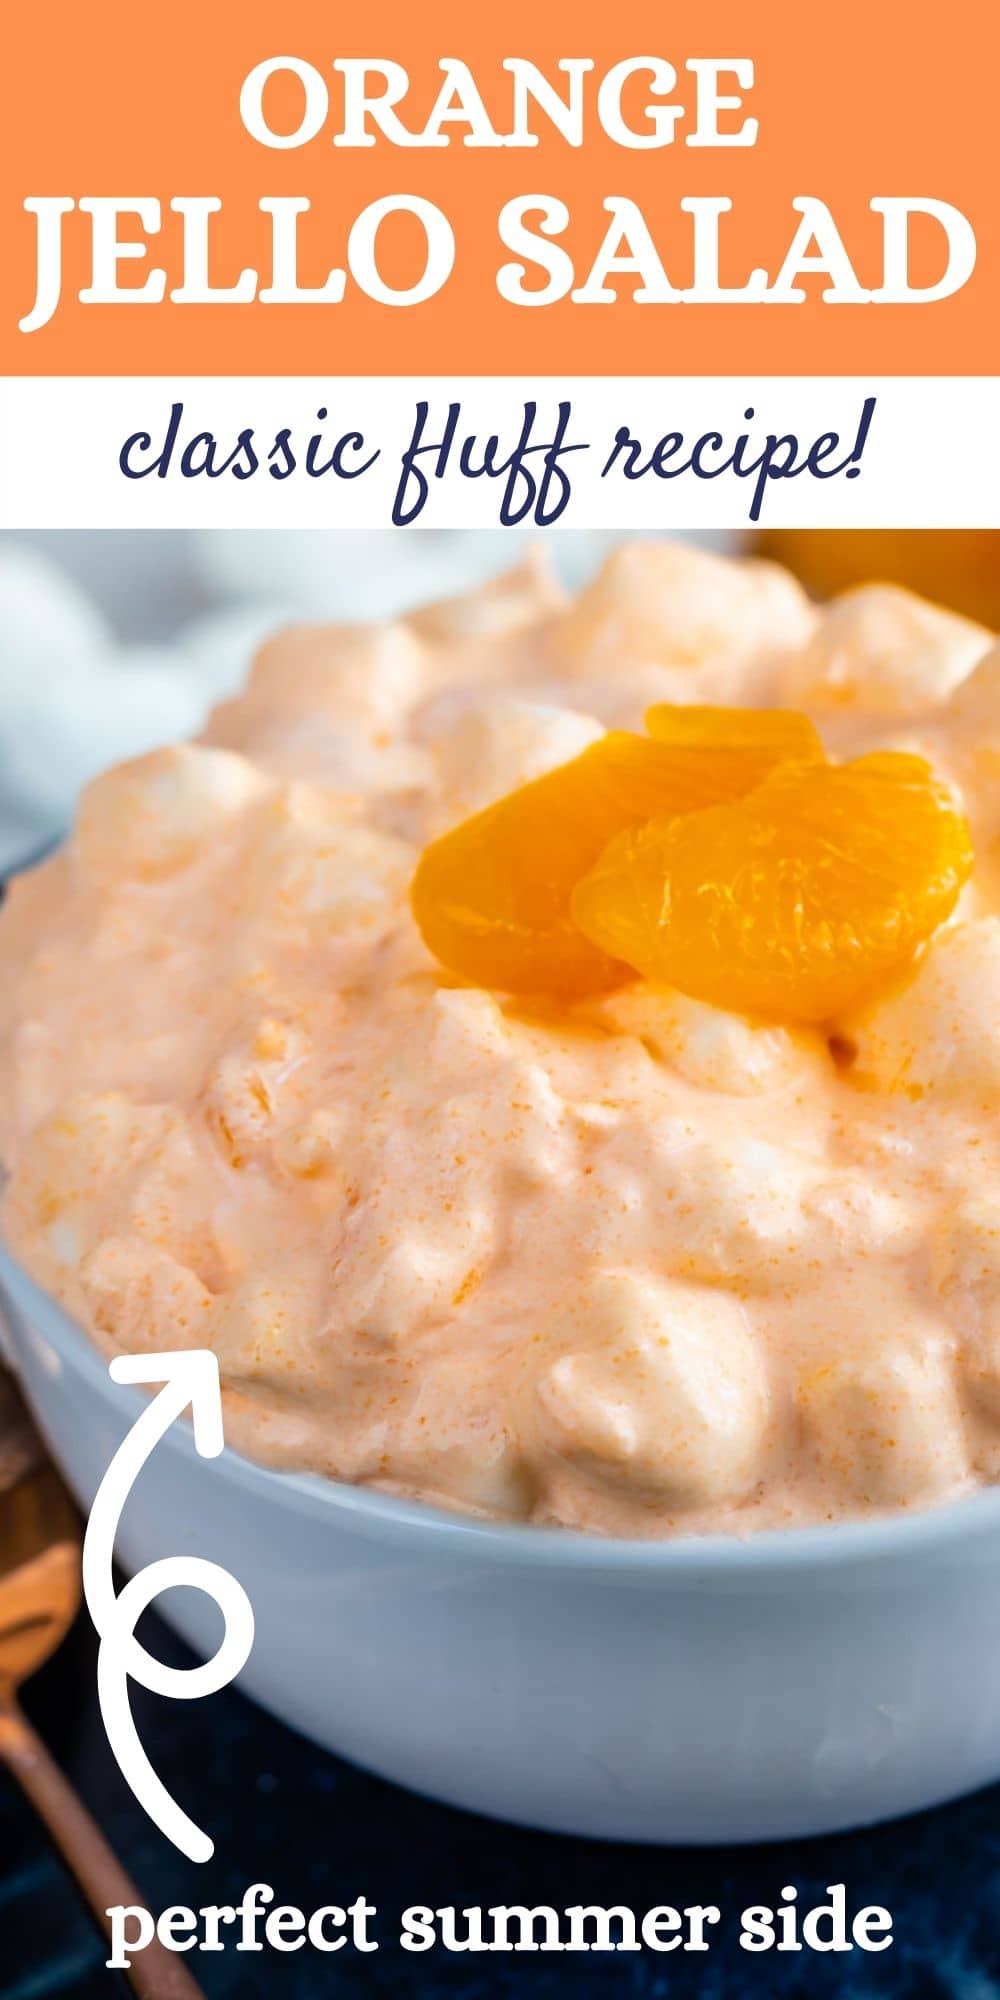 Orange jello salad in a small white bowl topped with mandarin oranges with recipe title on top of image